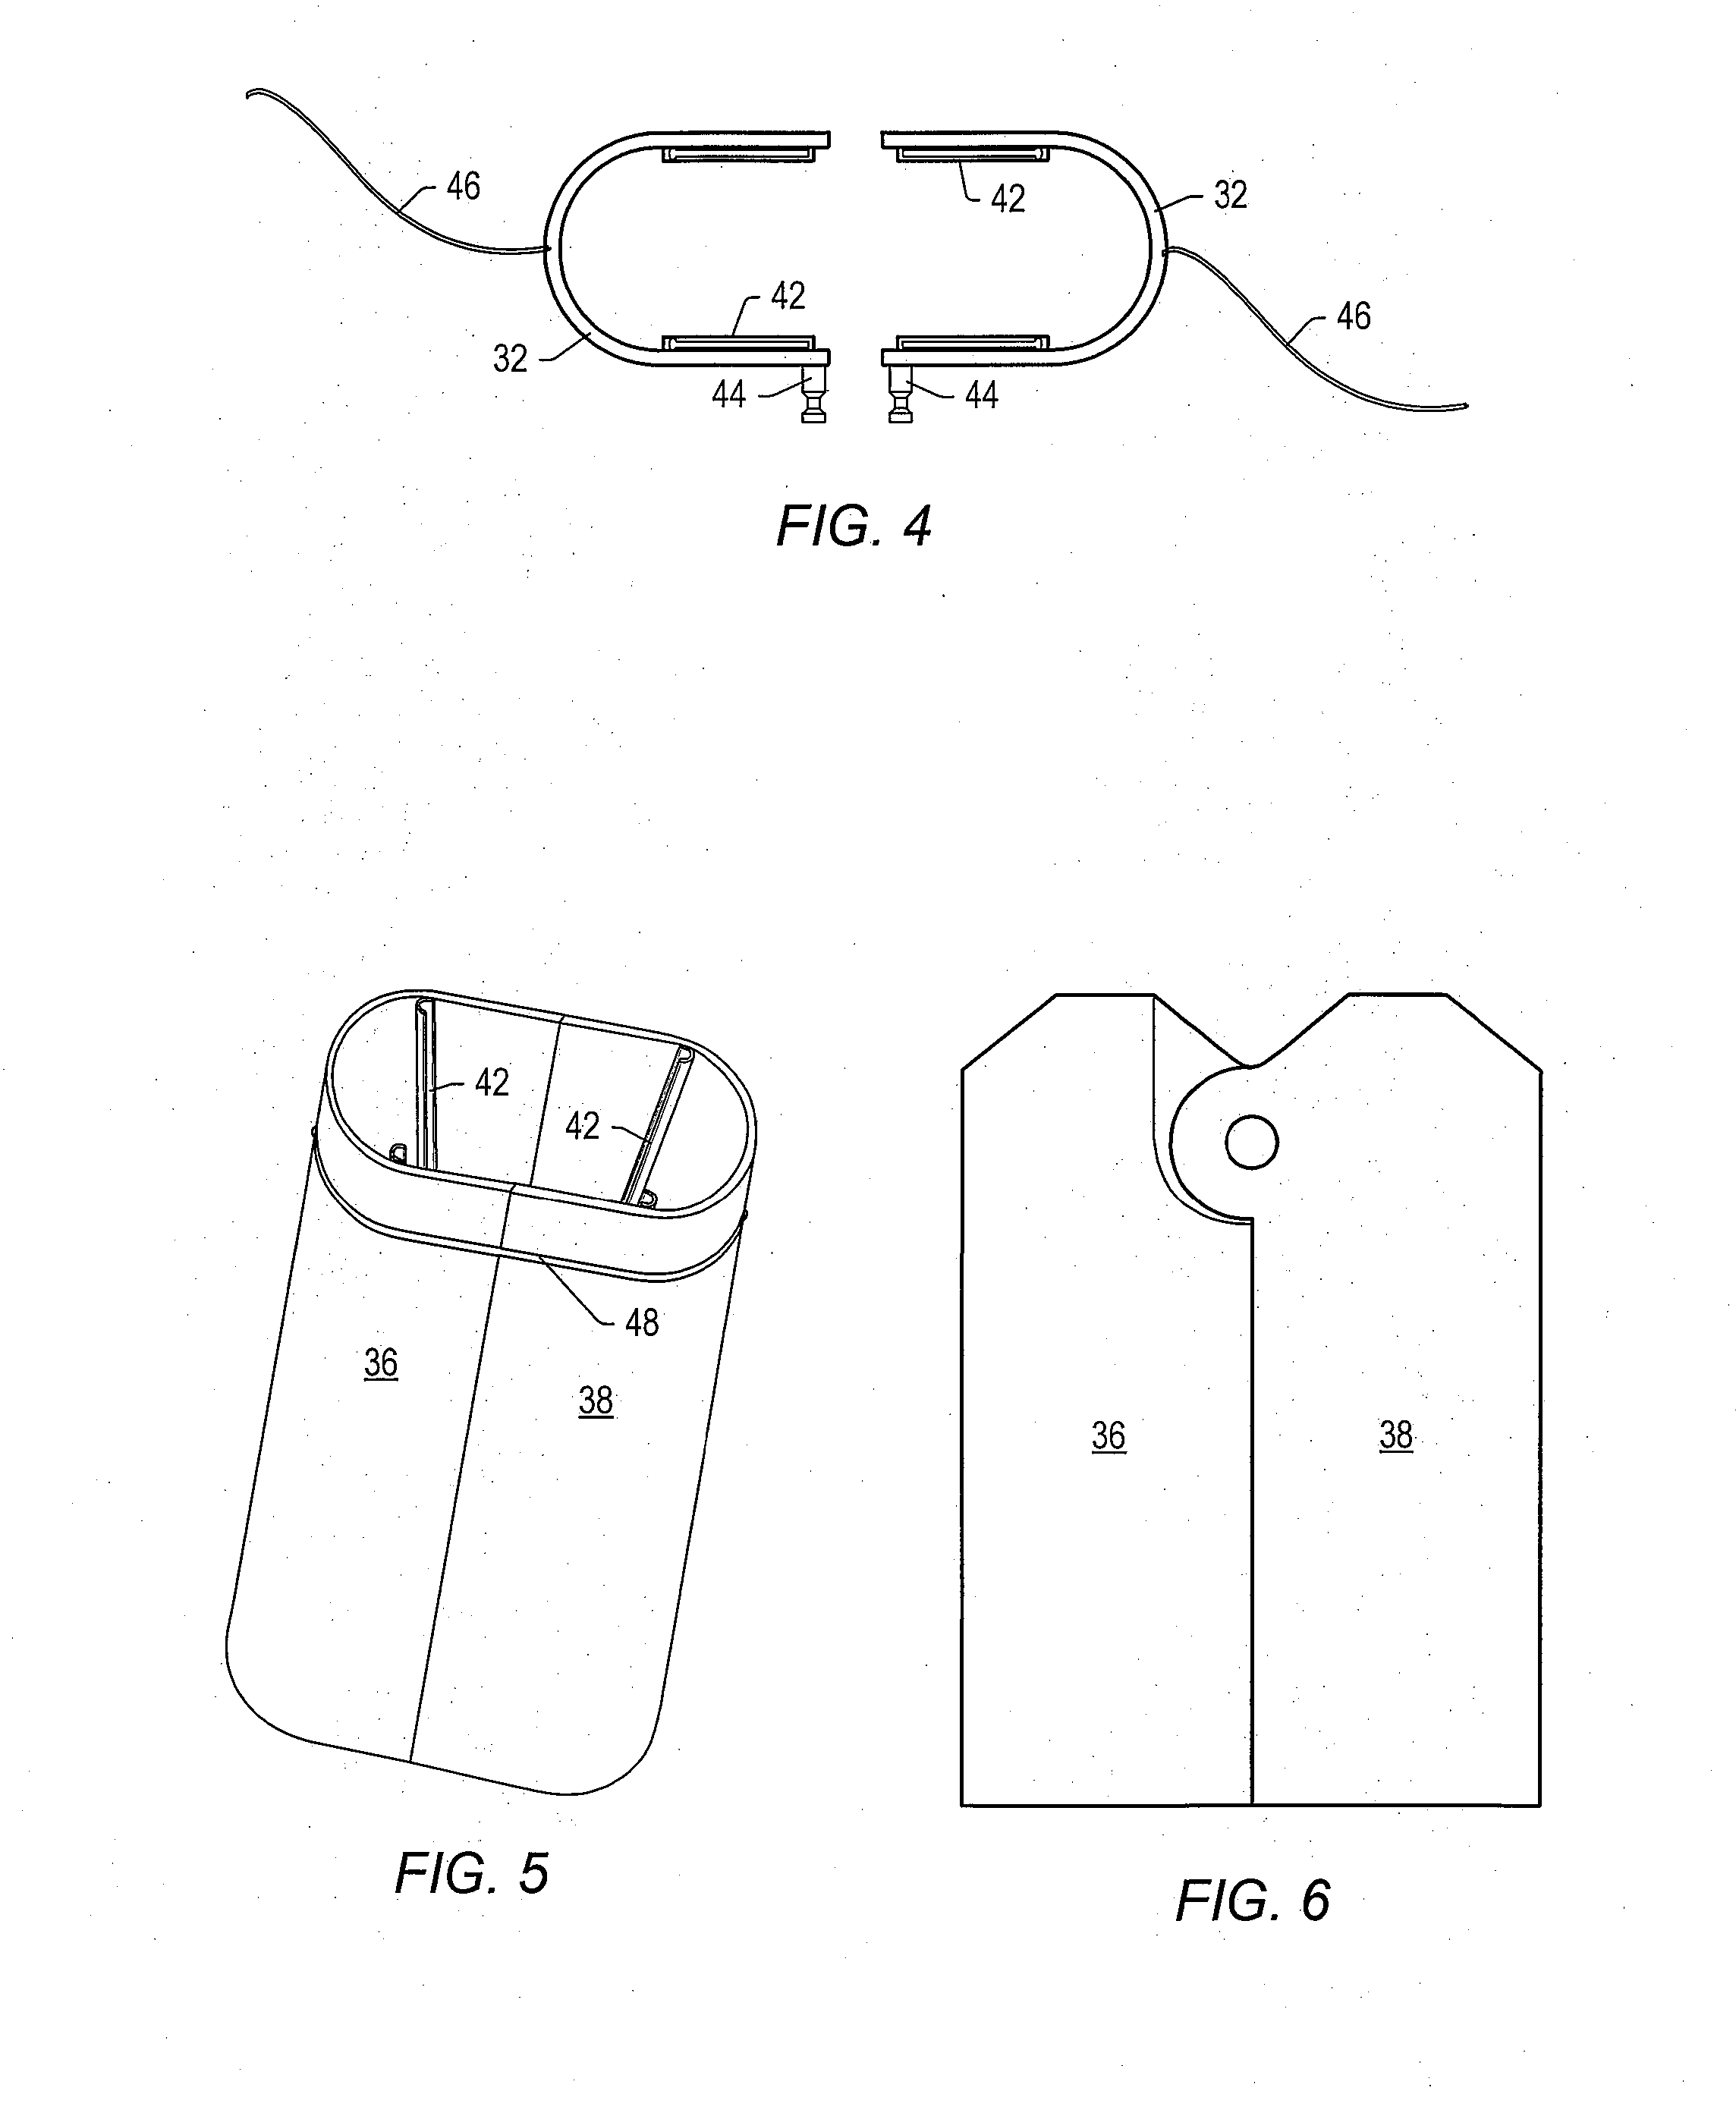 Surgical retractor and method of use